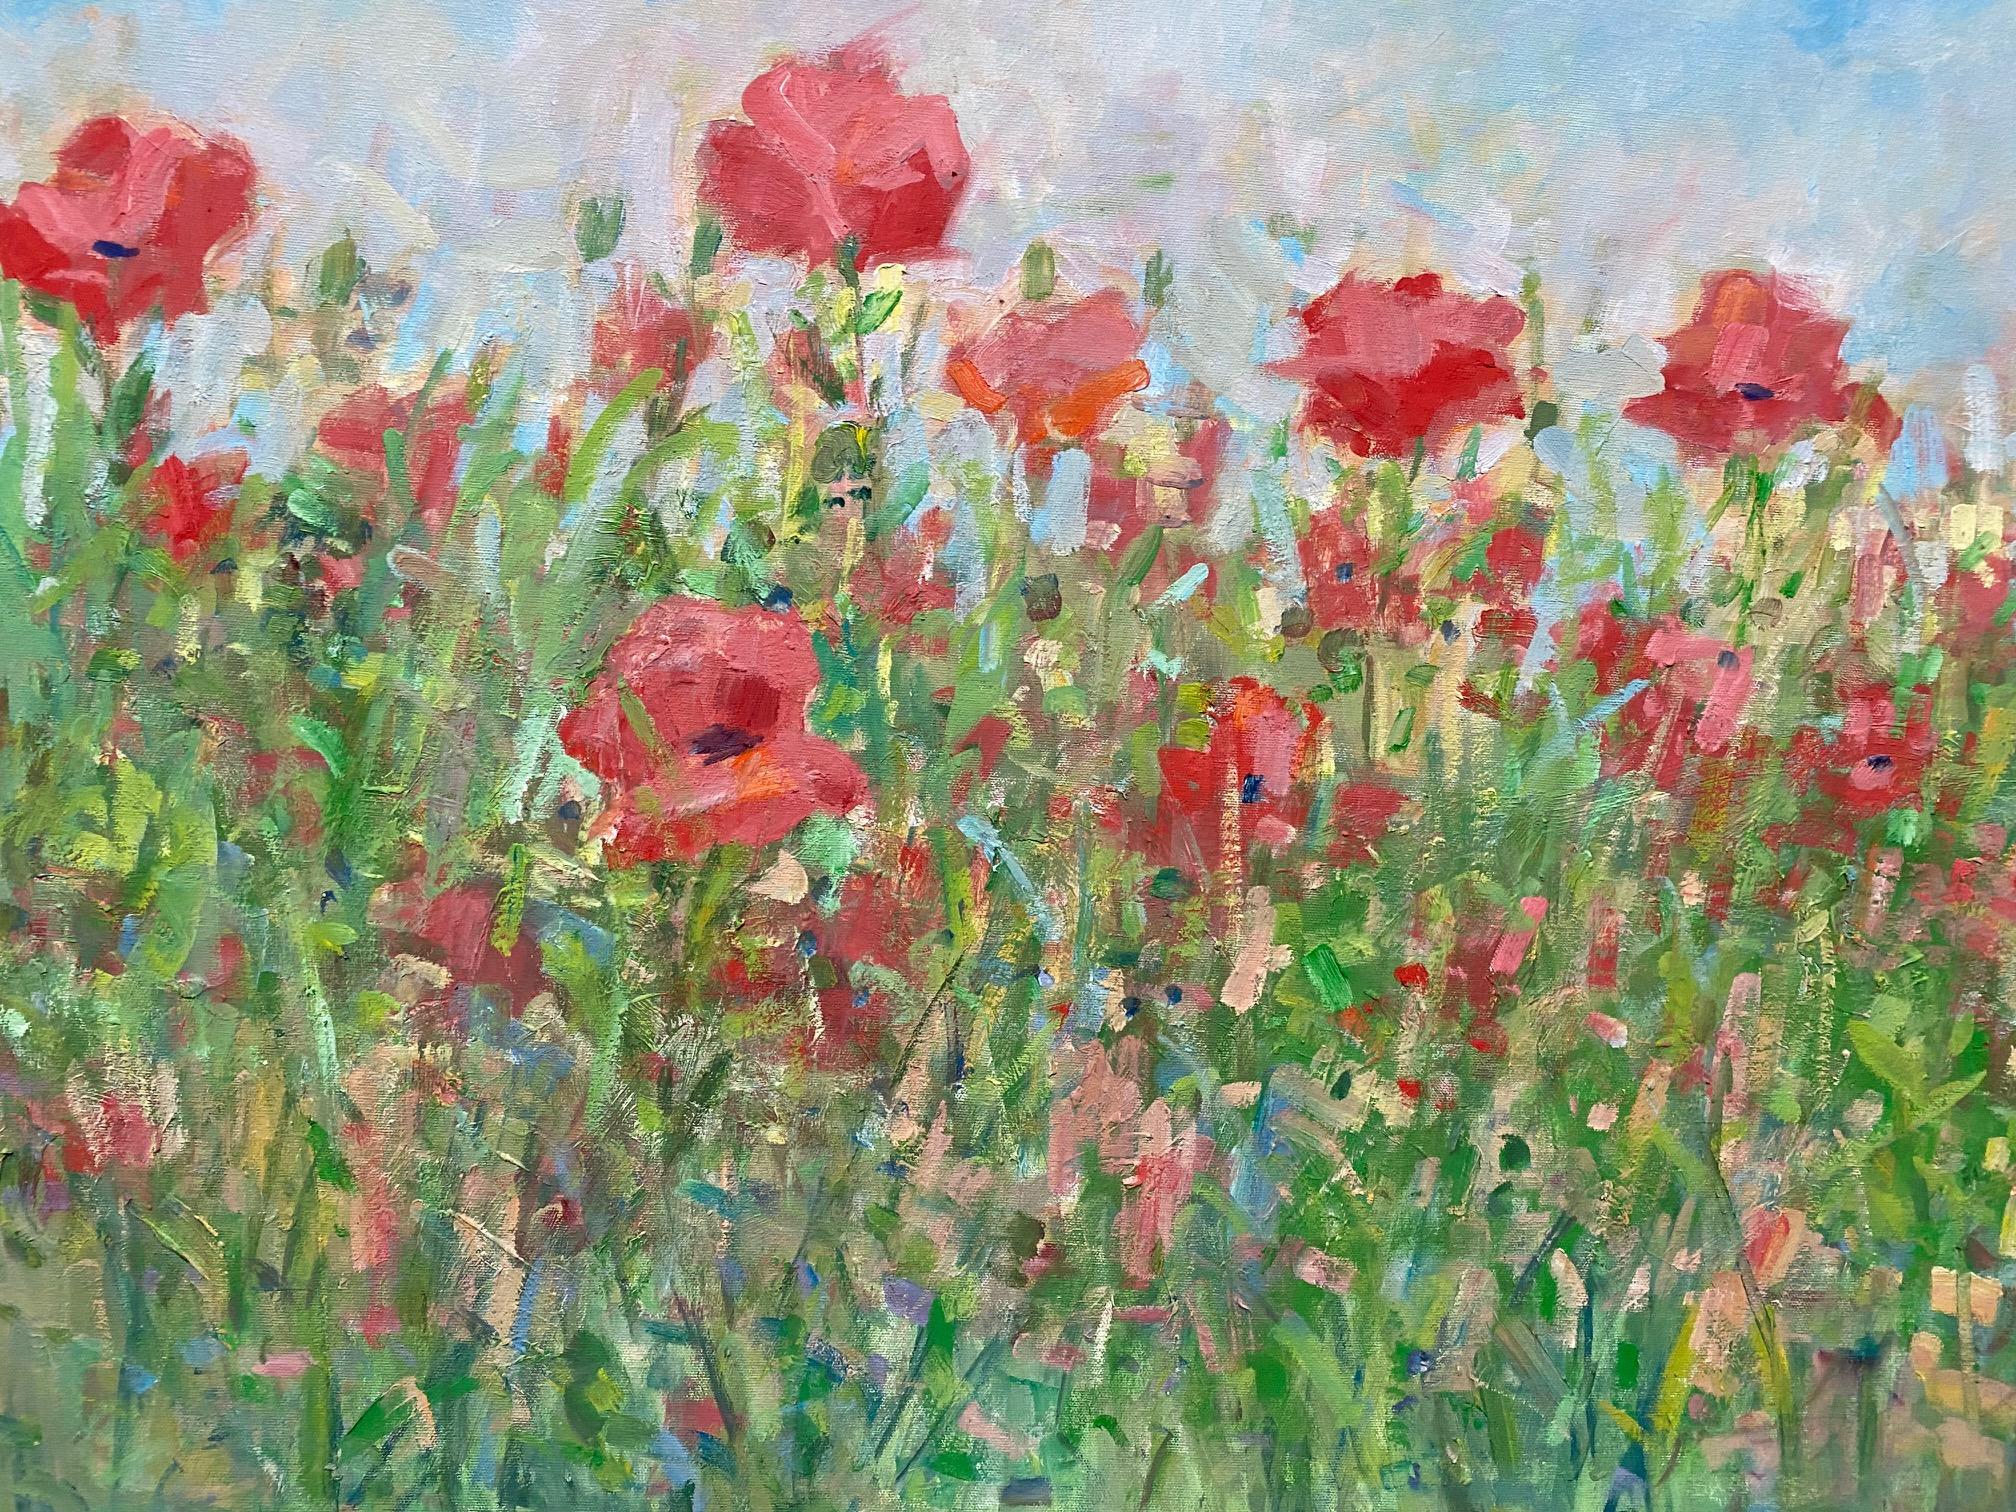 Field of Poppies, original 29x47 contemporary floral landscape - Painting by Bart DeCeglie